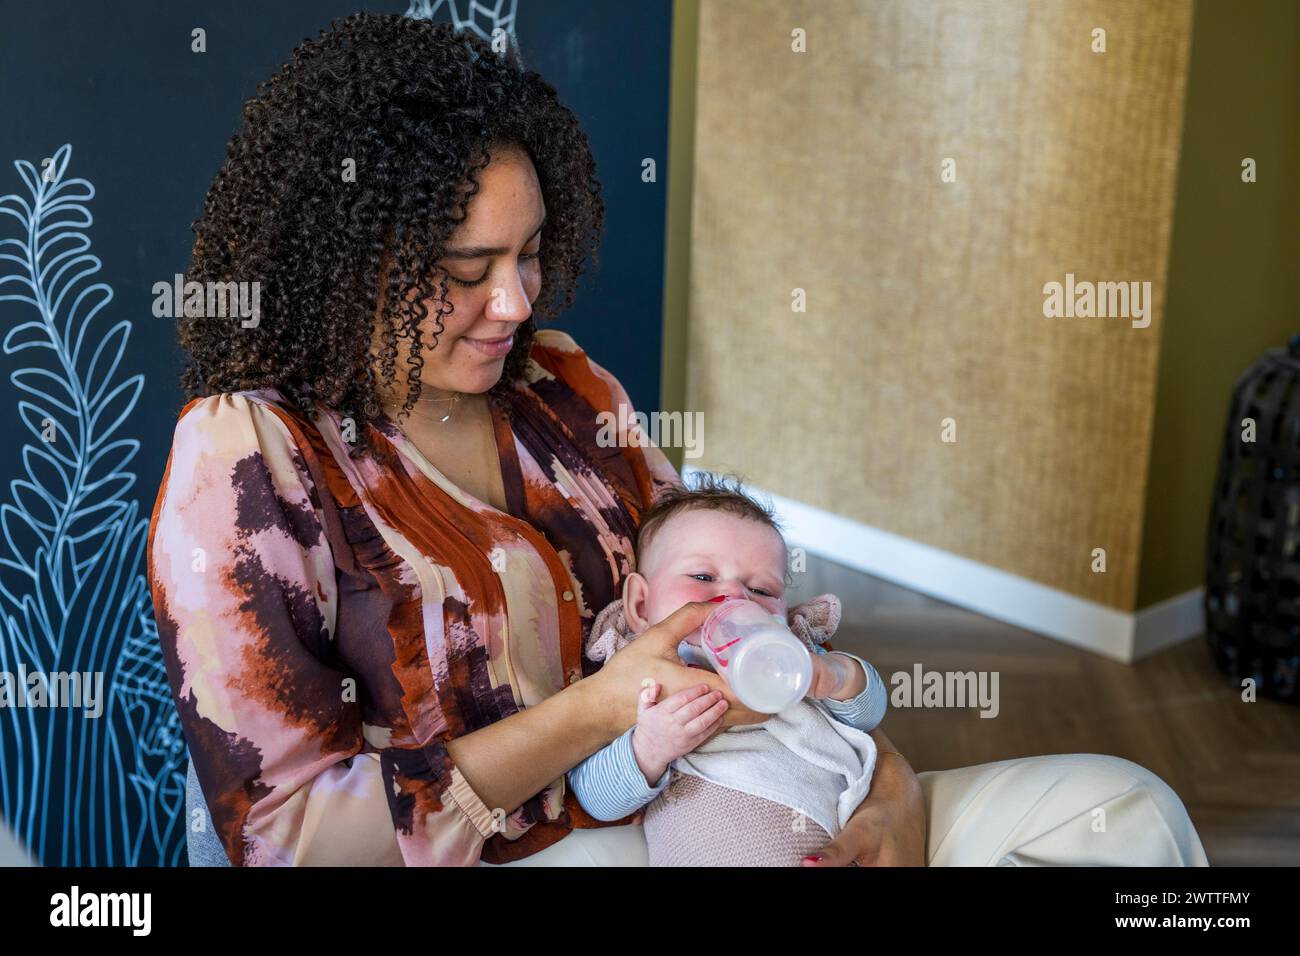 A mother tenderly feeds her baby with a bottle. Stock Photo